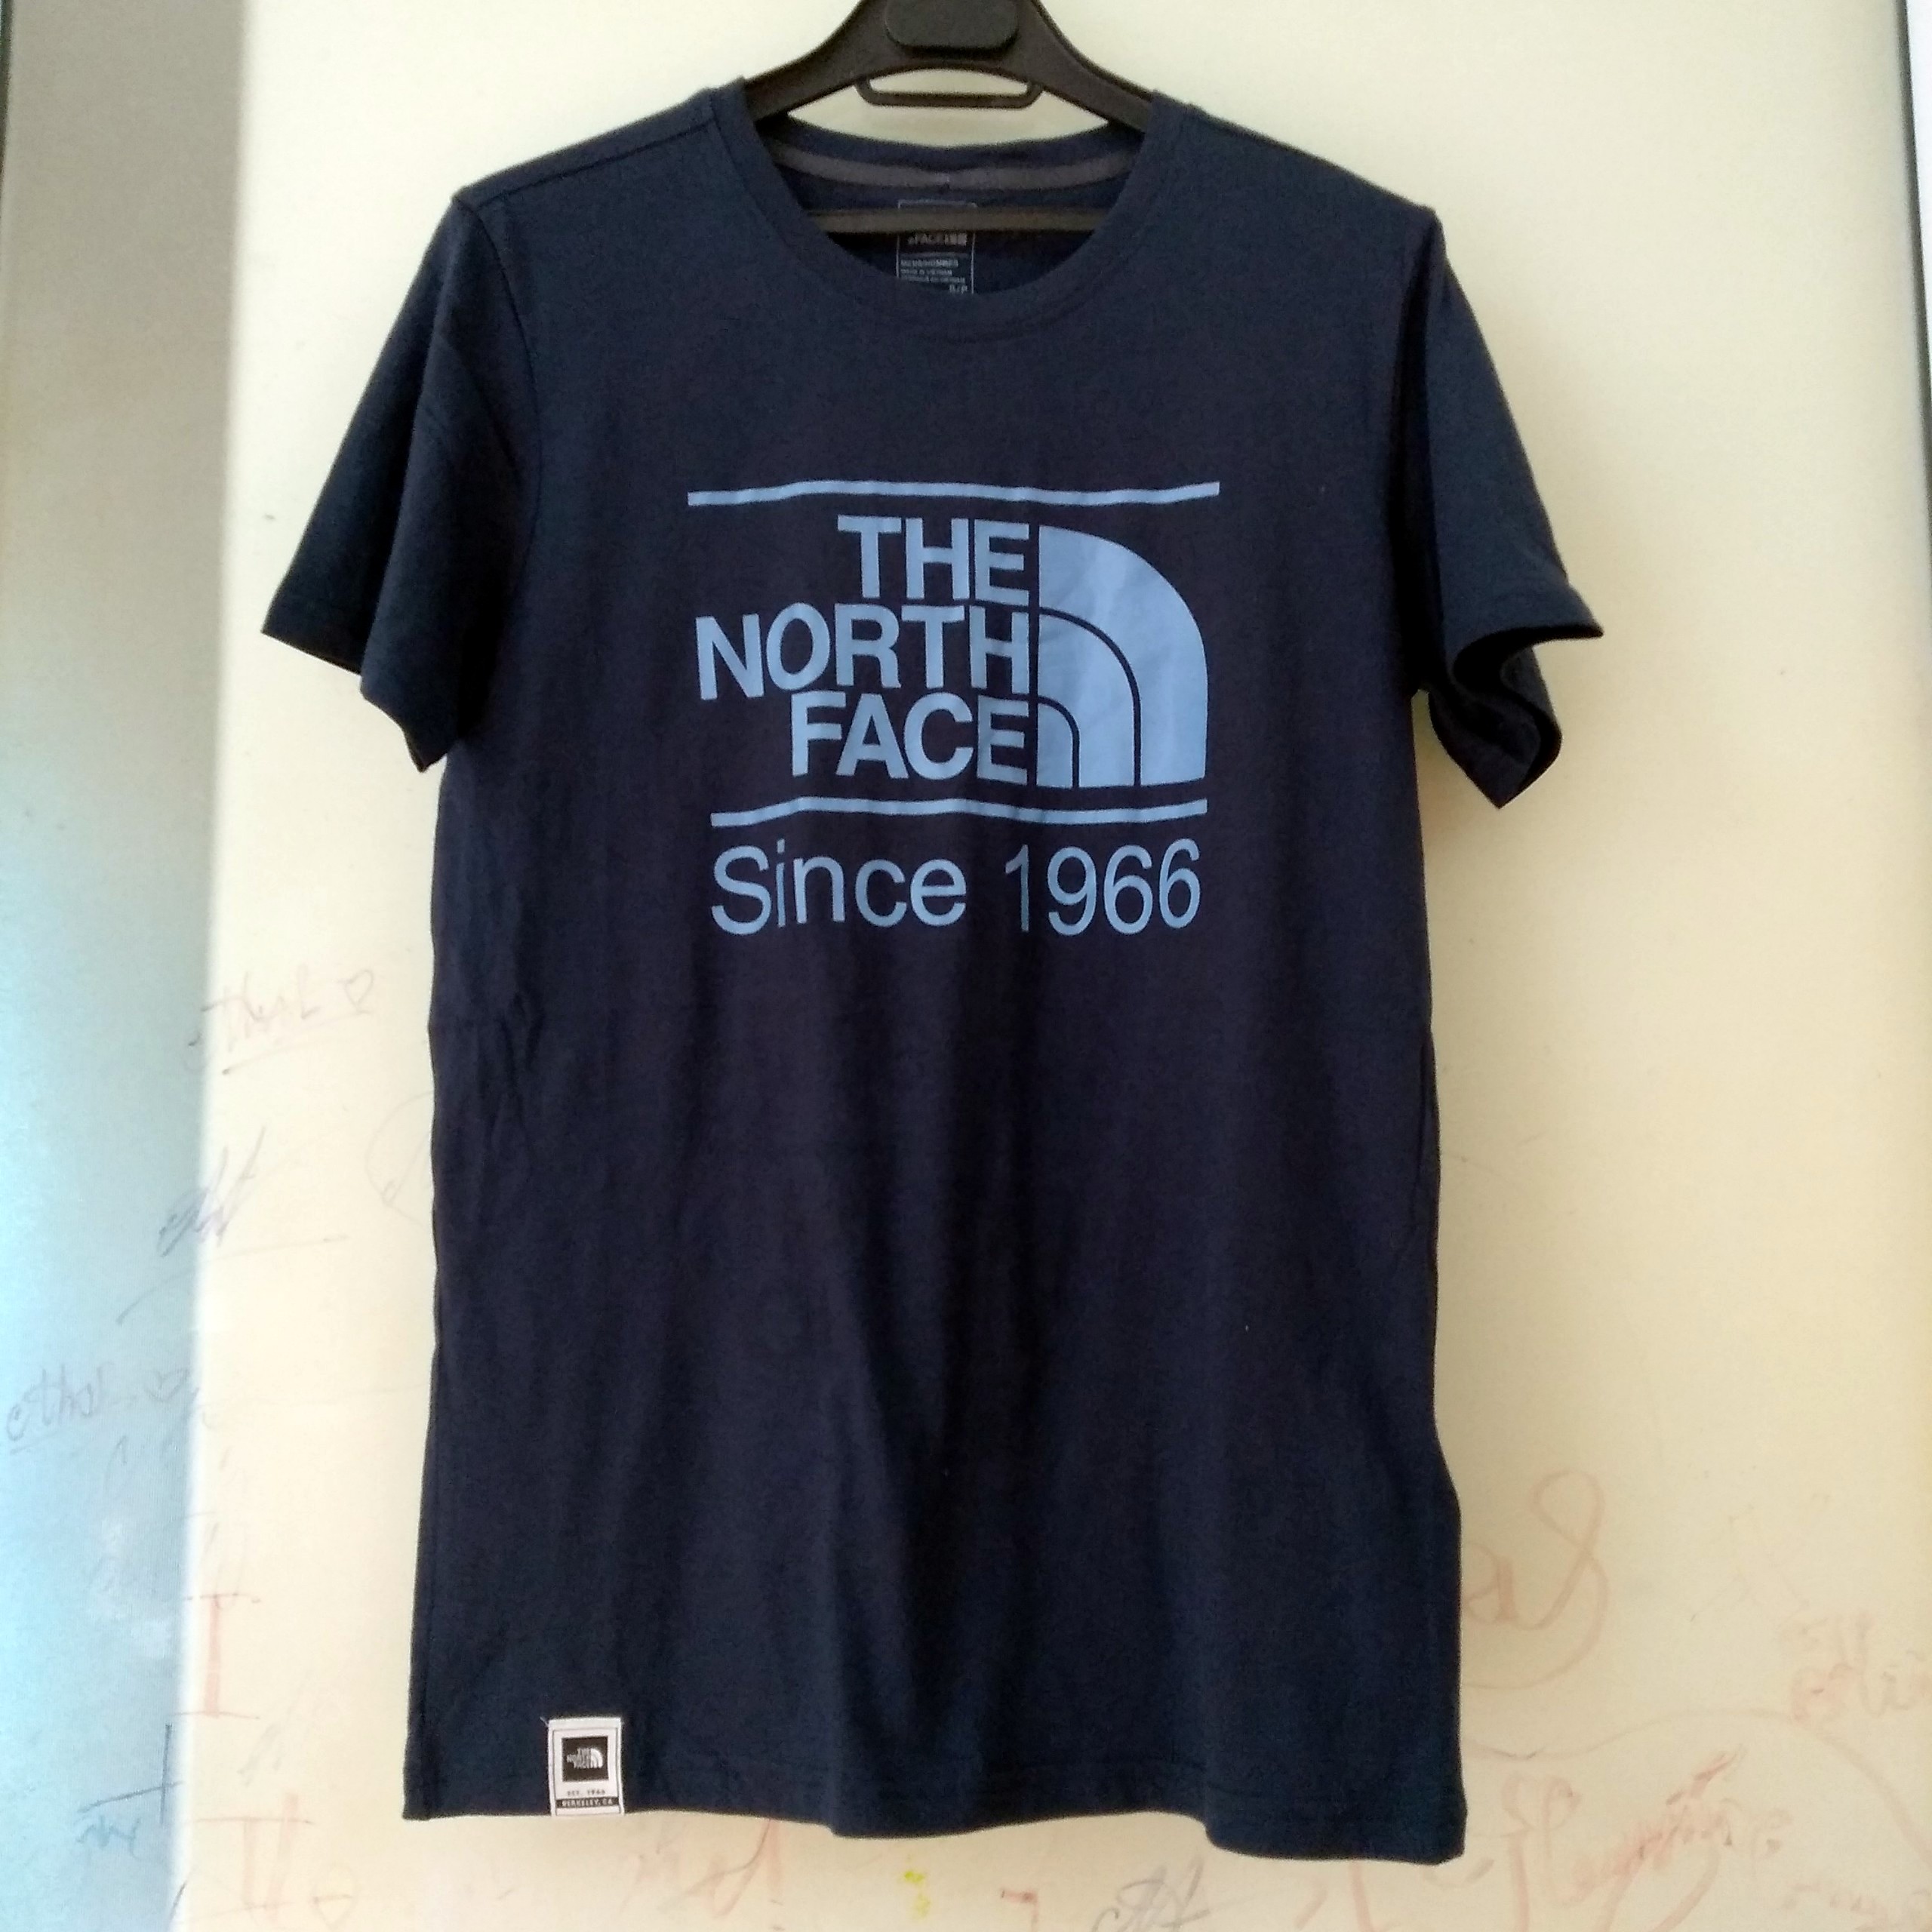 The North Face Vintage Pyrenees Tri Blend Short Sleeve Shirt The North Face ktmart.vn 3